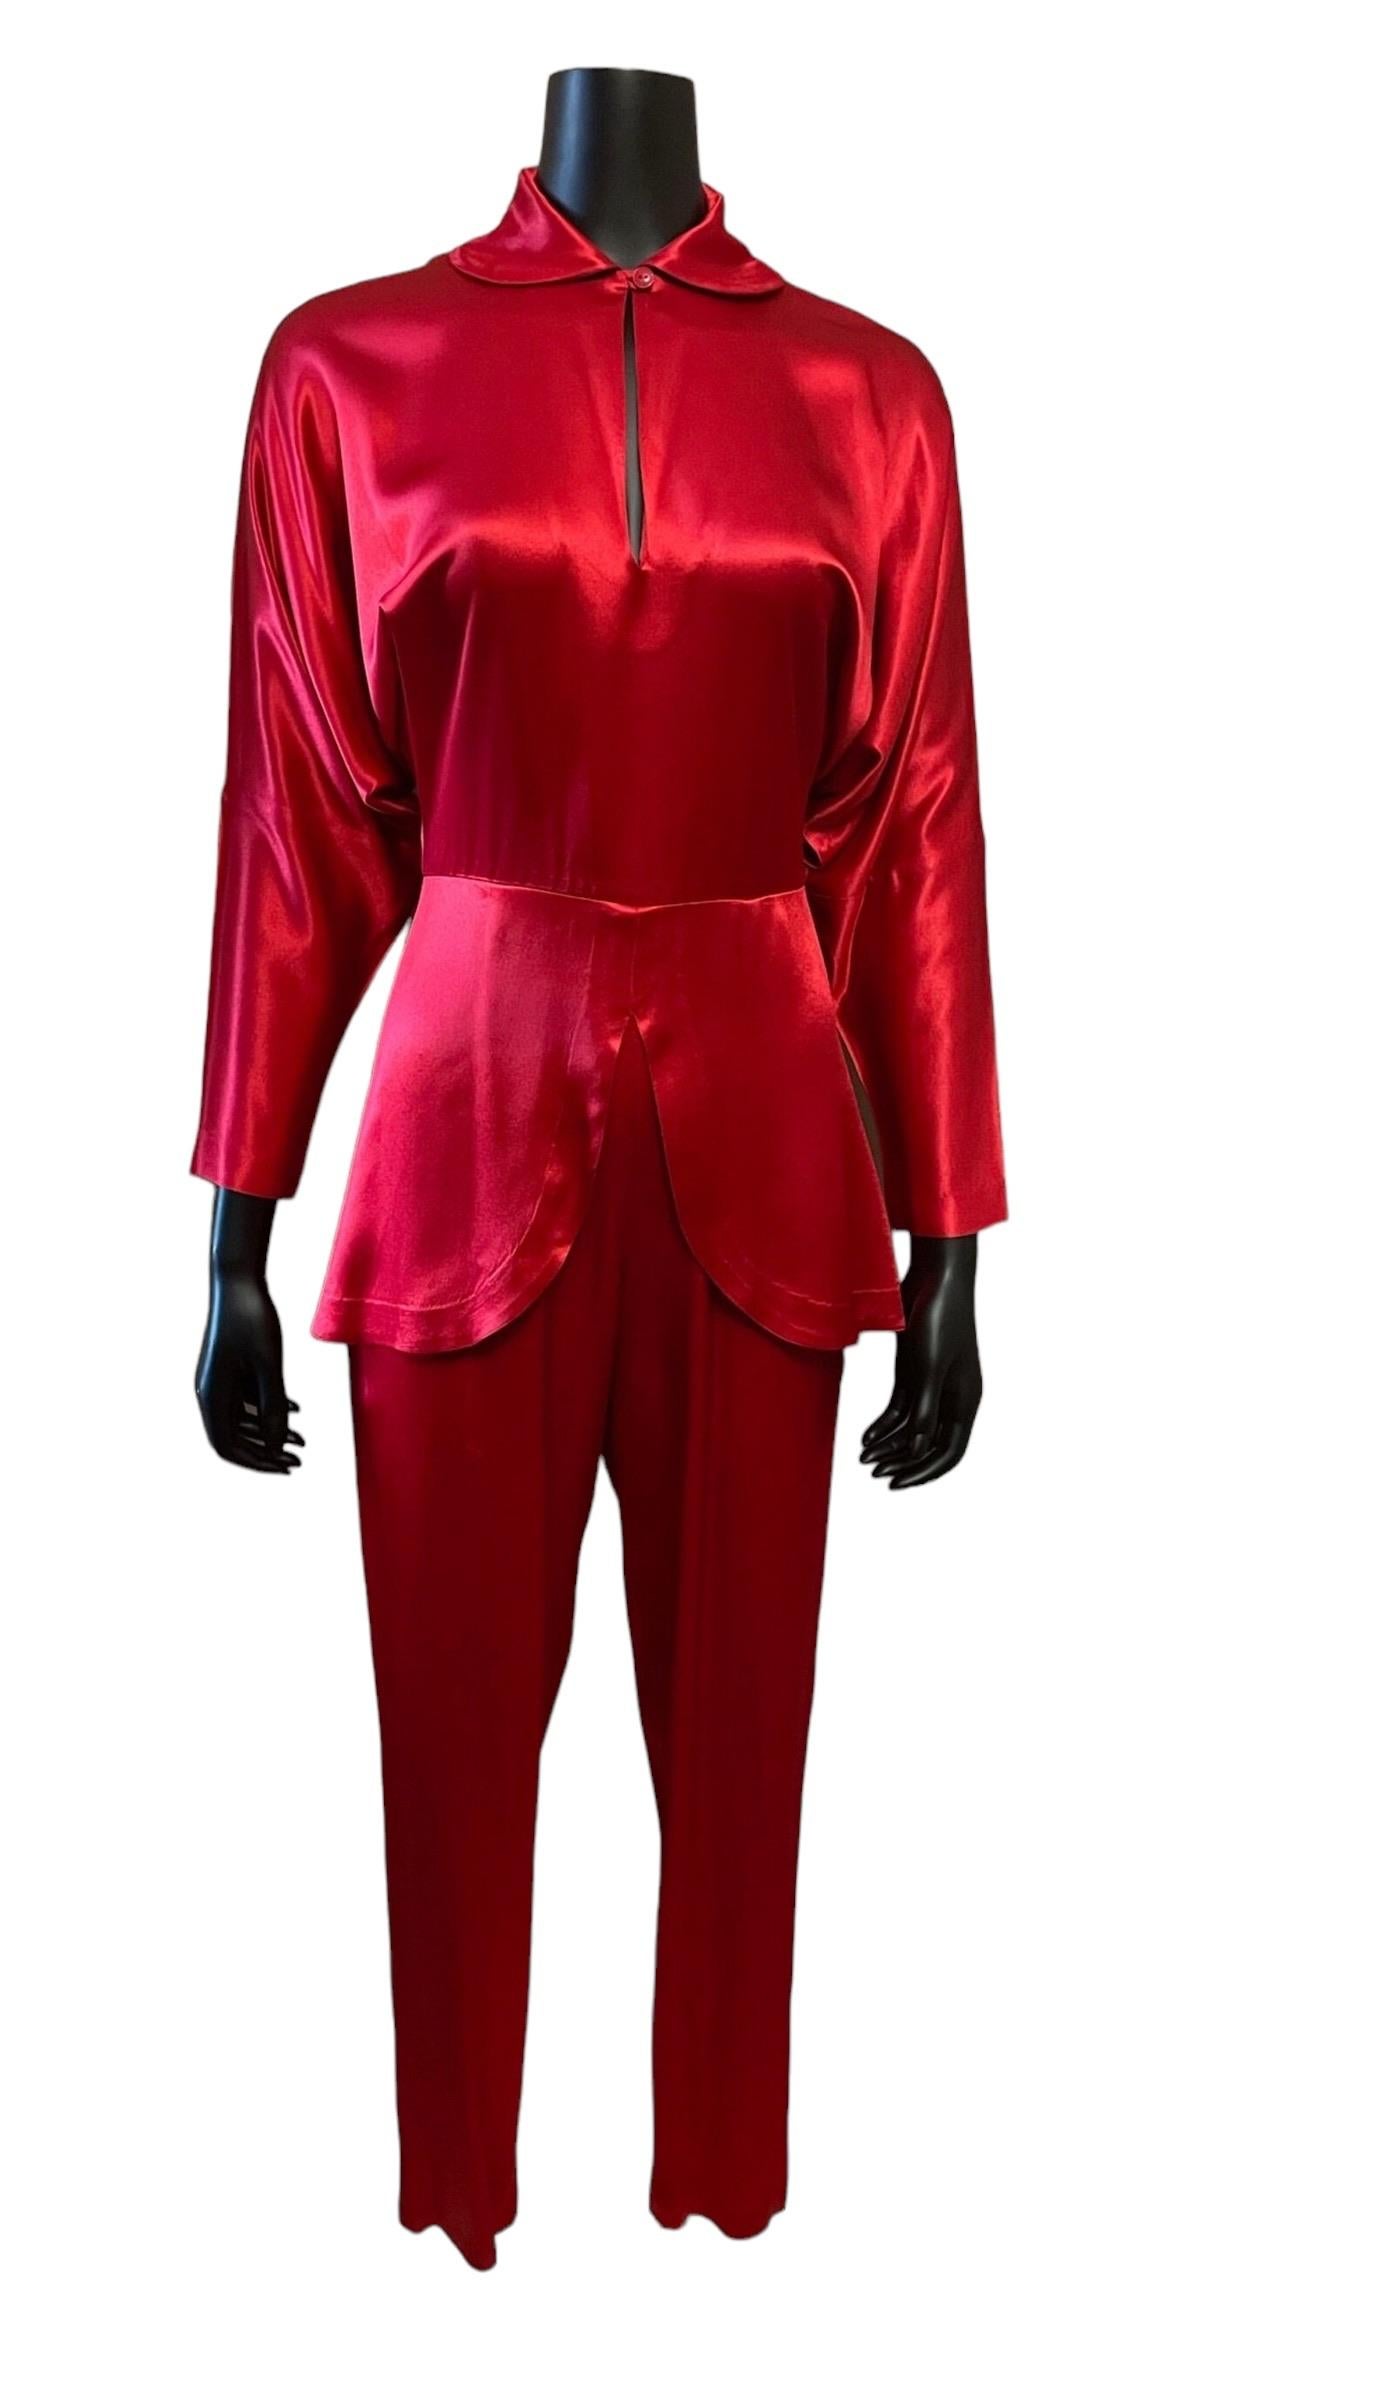 Norma Kamali Lipstick Red Jumpsuit, Circa 1980s In Excellent Condition For Sale In Brooklyn, NY